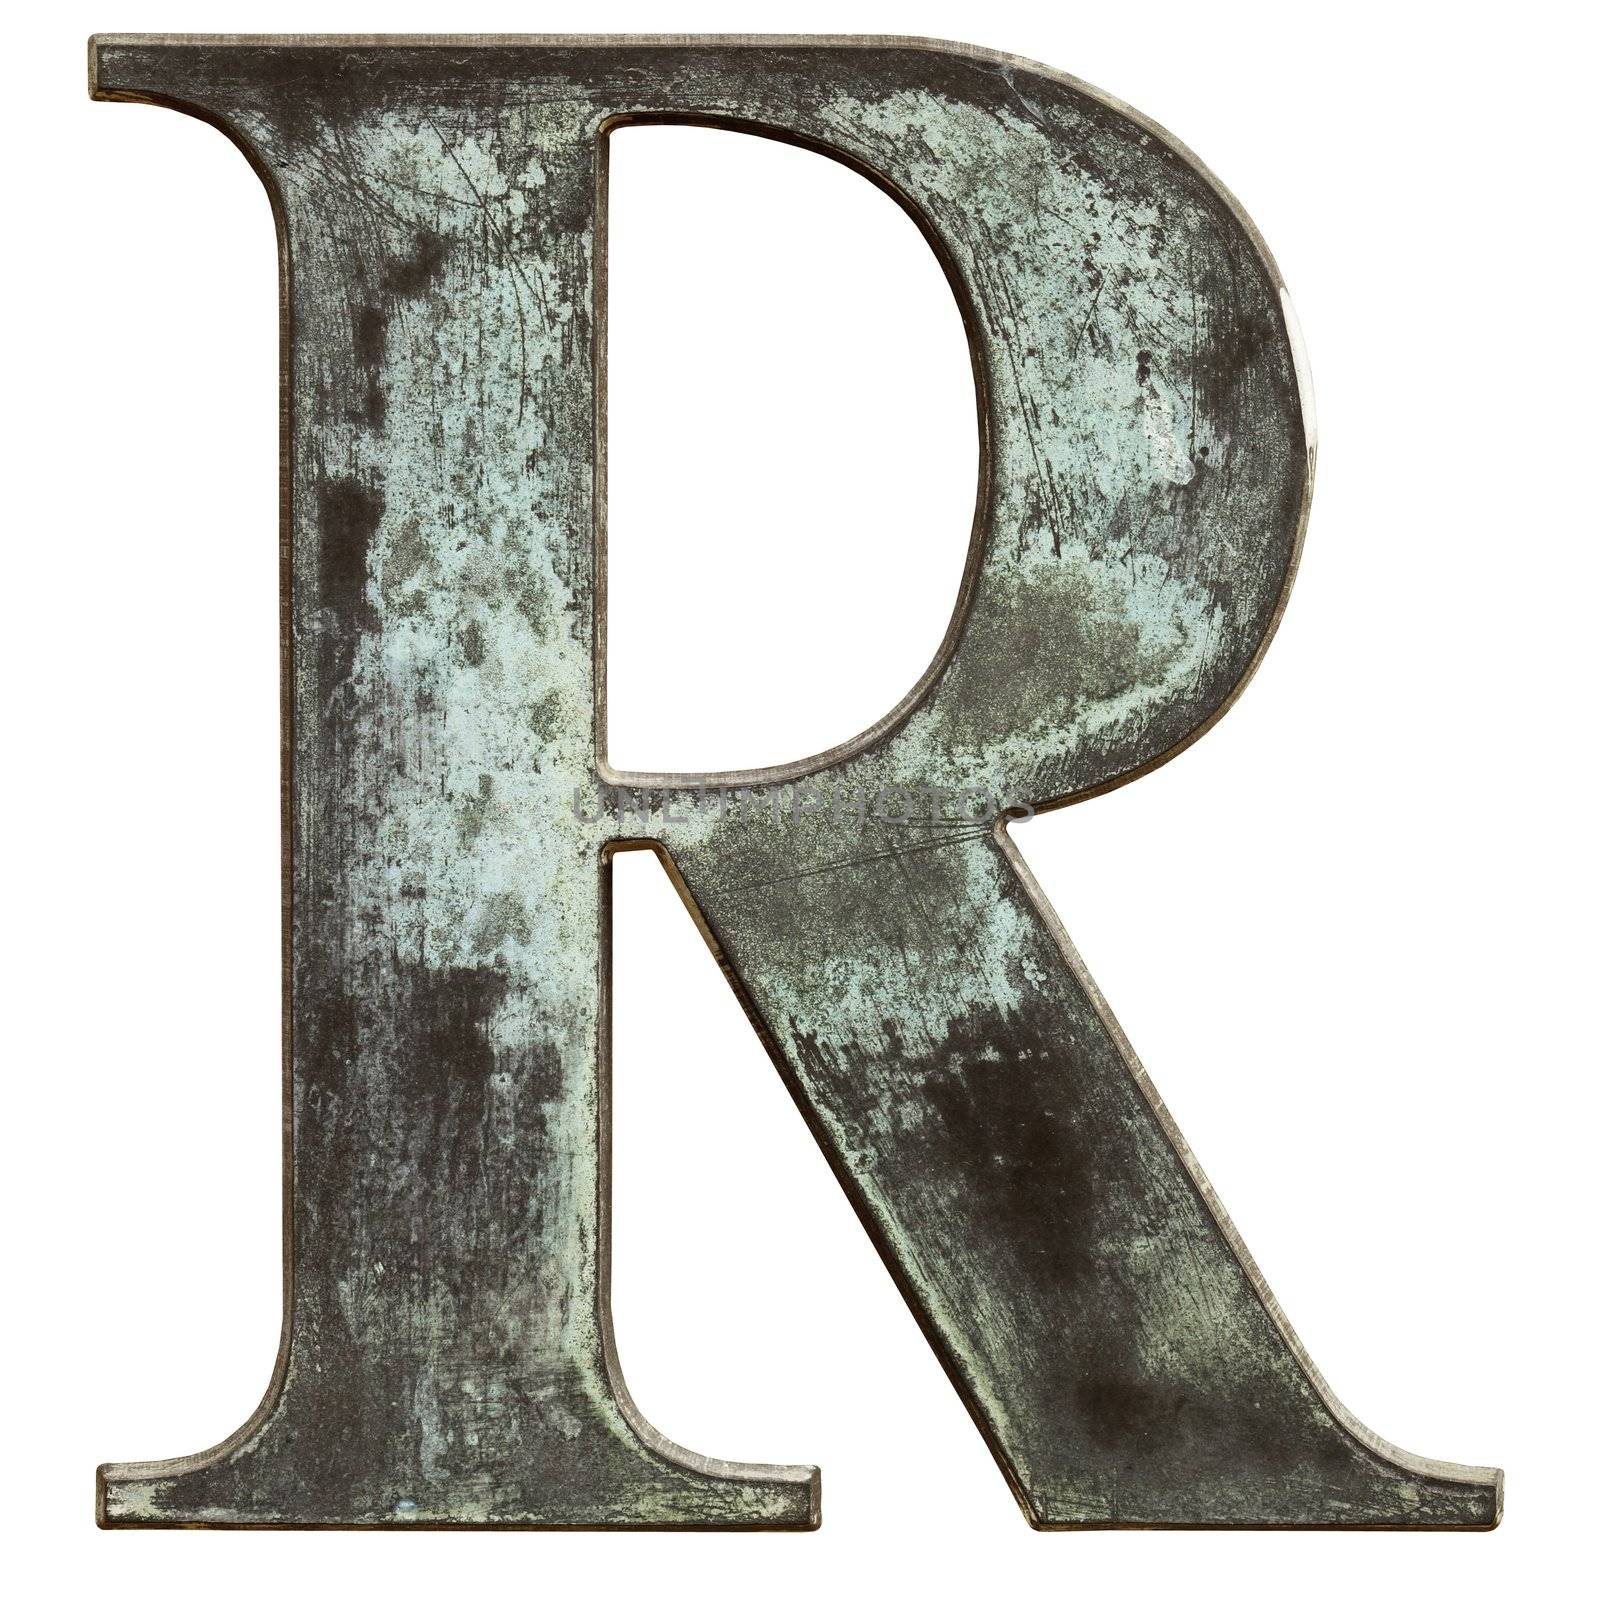 R by Stocksnapper